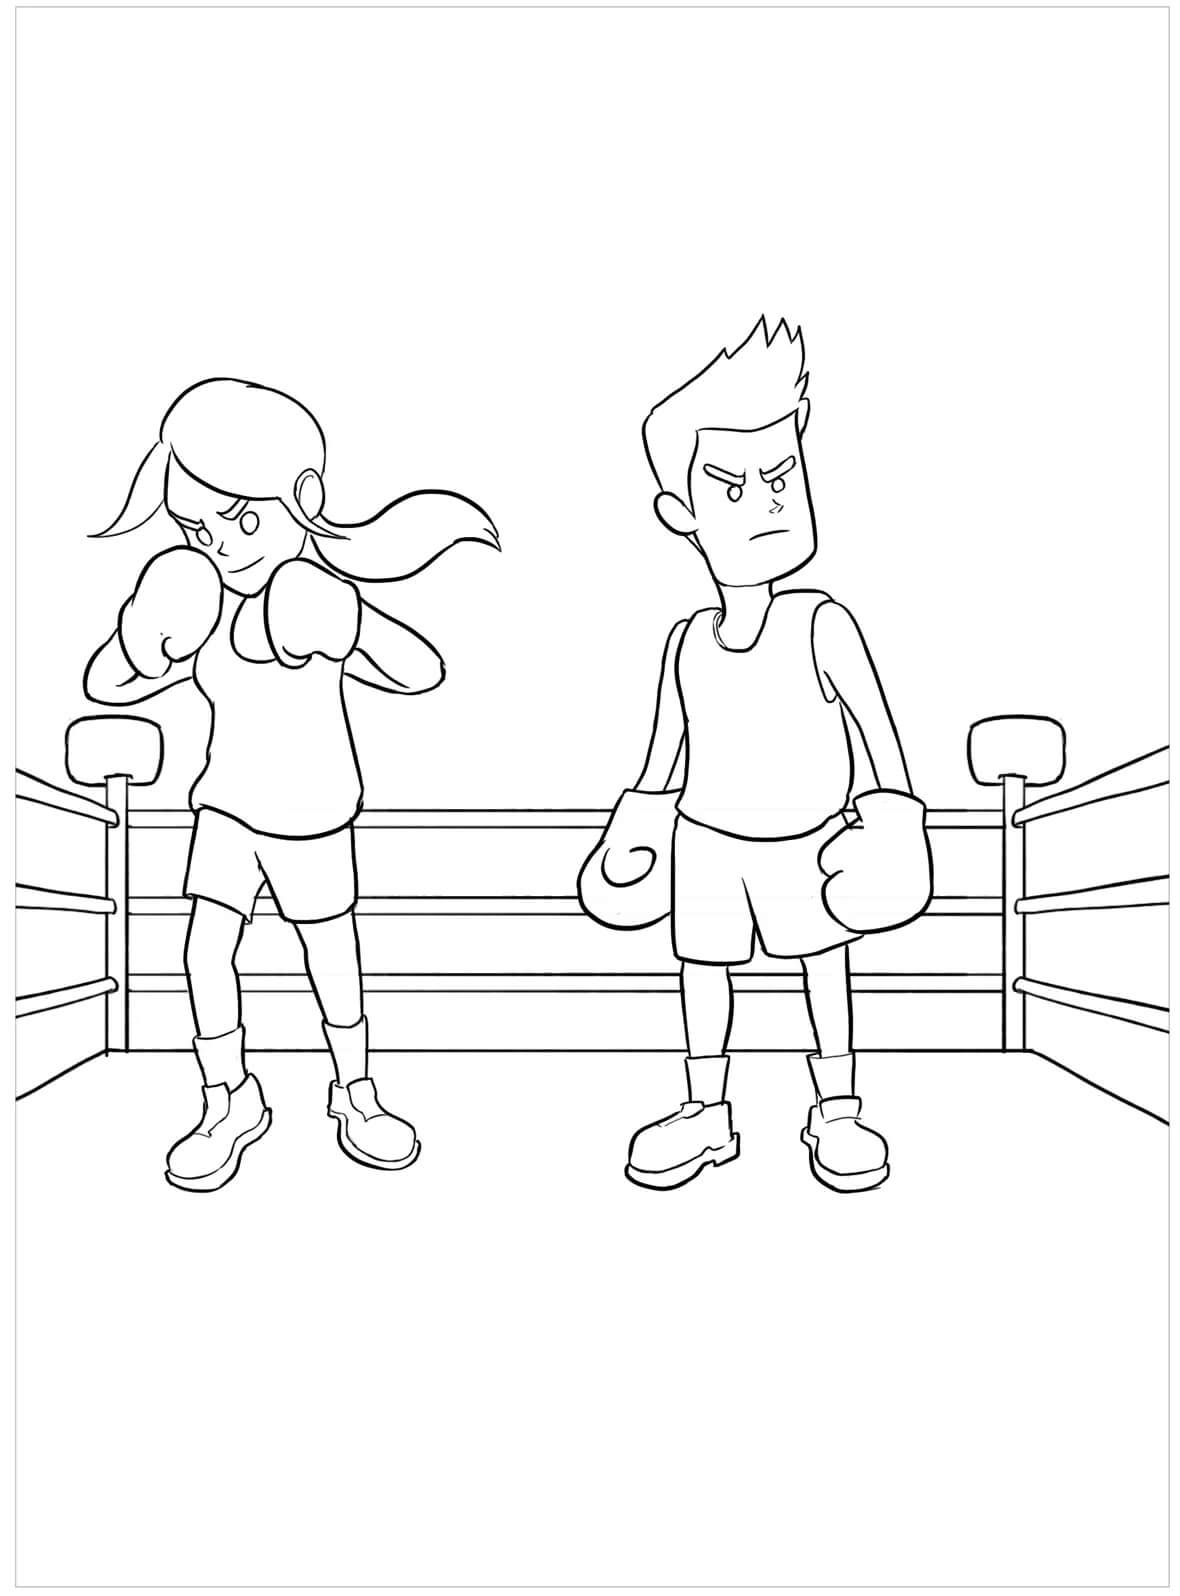 Boxing Coloring Book: Boxing Coloring Pages For Preschoolers, Over 30 Pages  to Color, Perfect Boxing fights Coloring Books for boys, girls, and kids